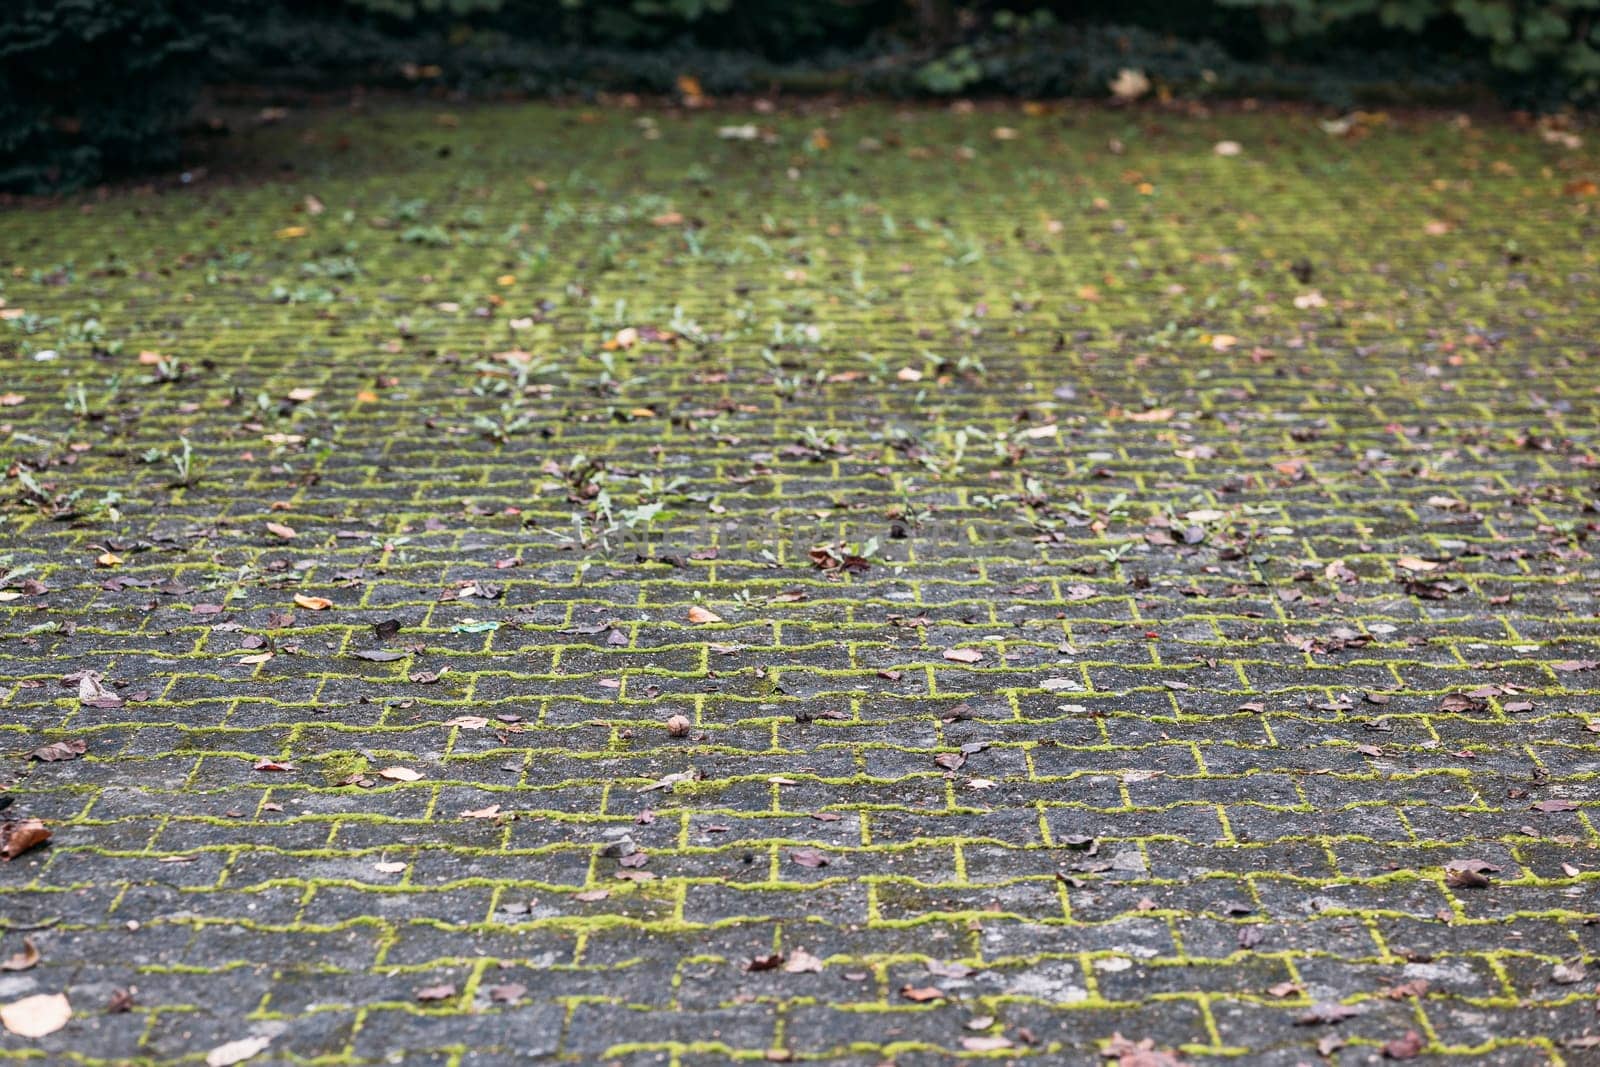 Old paving stones with grass sprouting through cracks and joints over time. Lined paving slabs in street covered with dried leaves